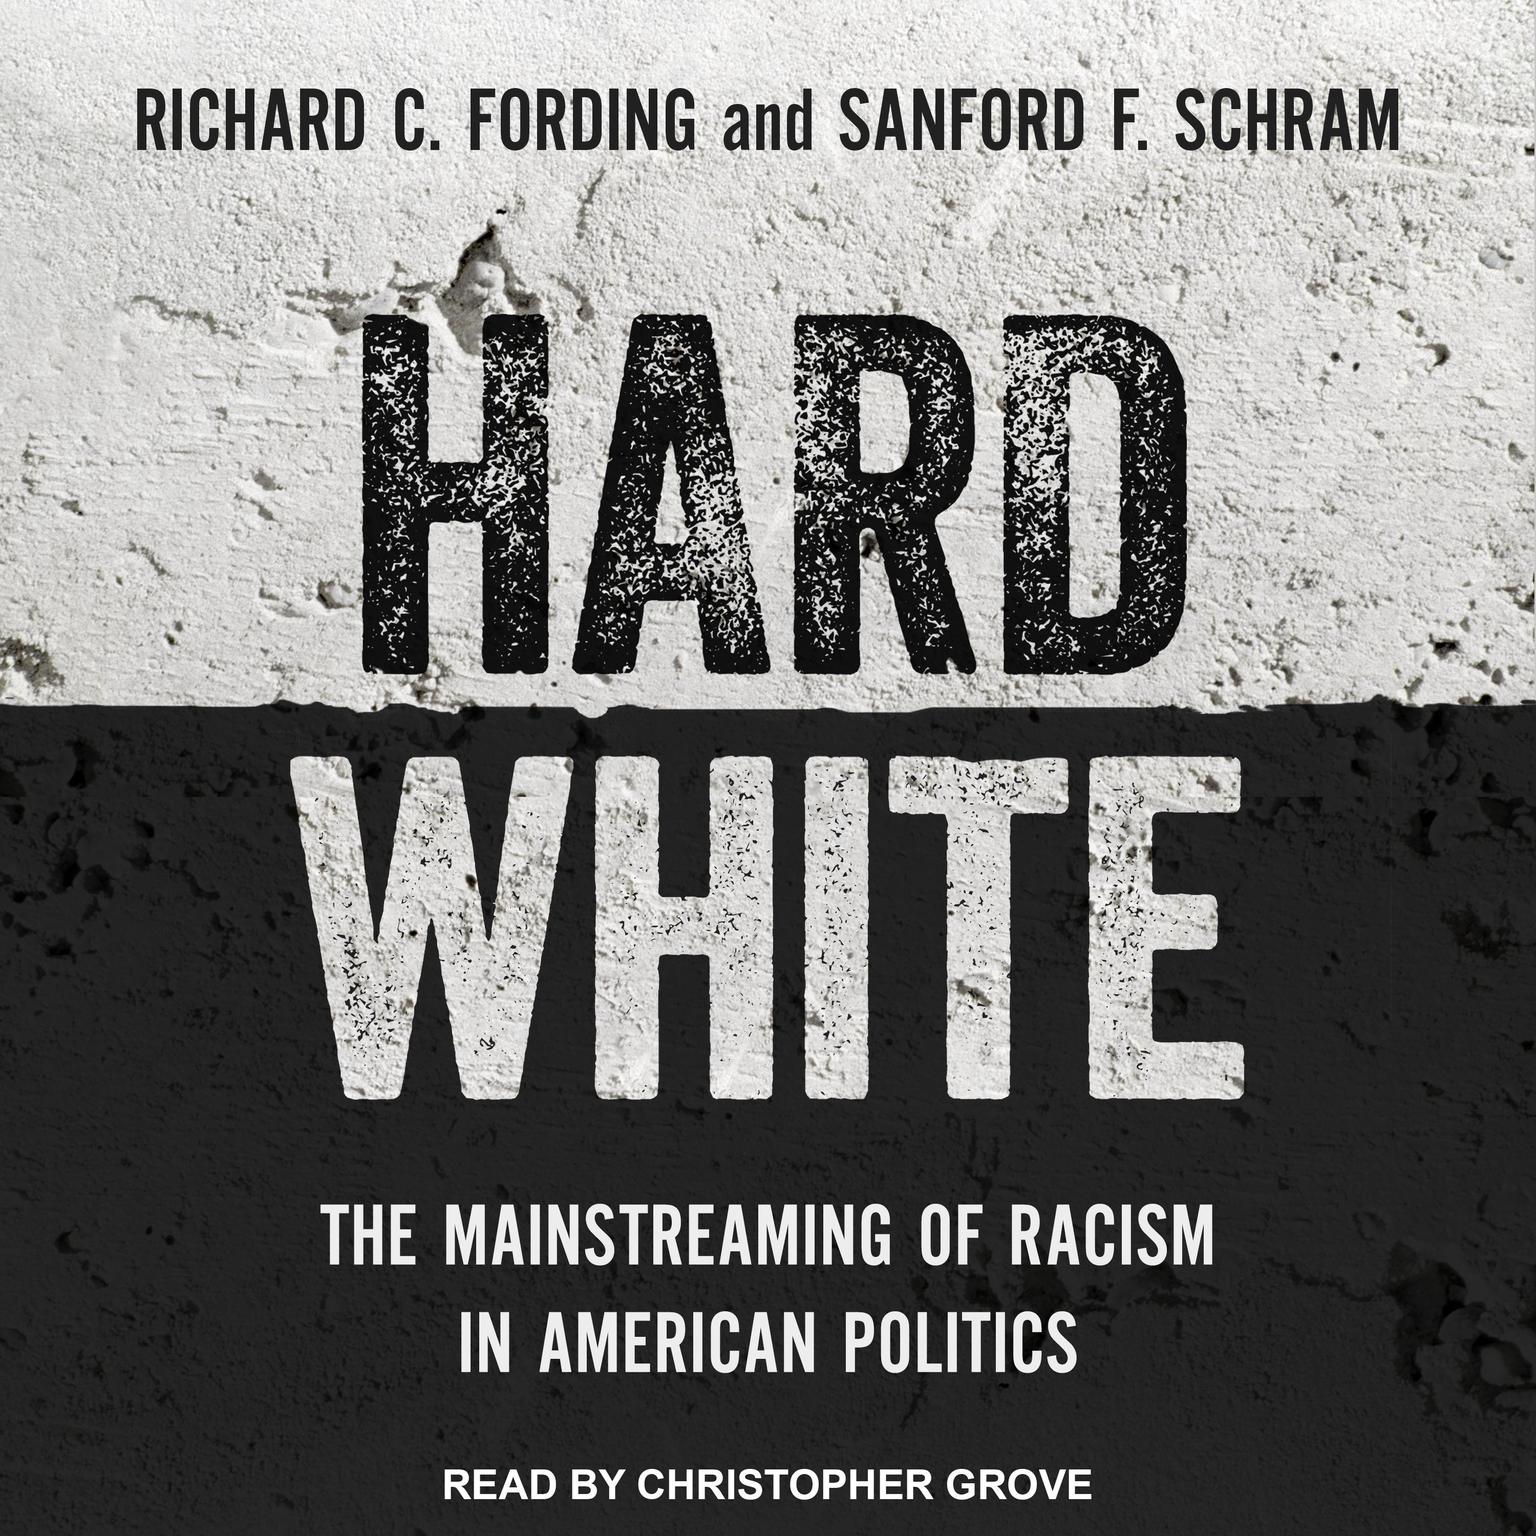 Hard White: The Mainstreaming of Racism in American Politics Audiobook, by Richard C. Fording